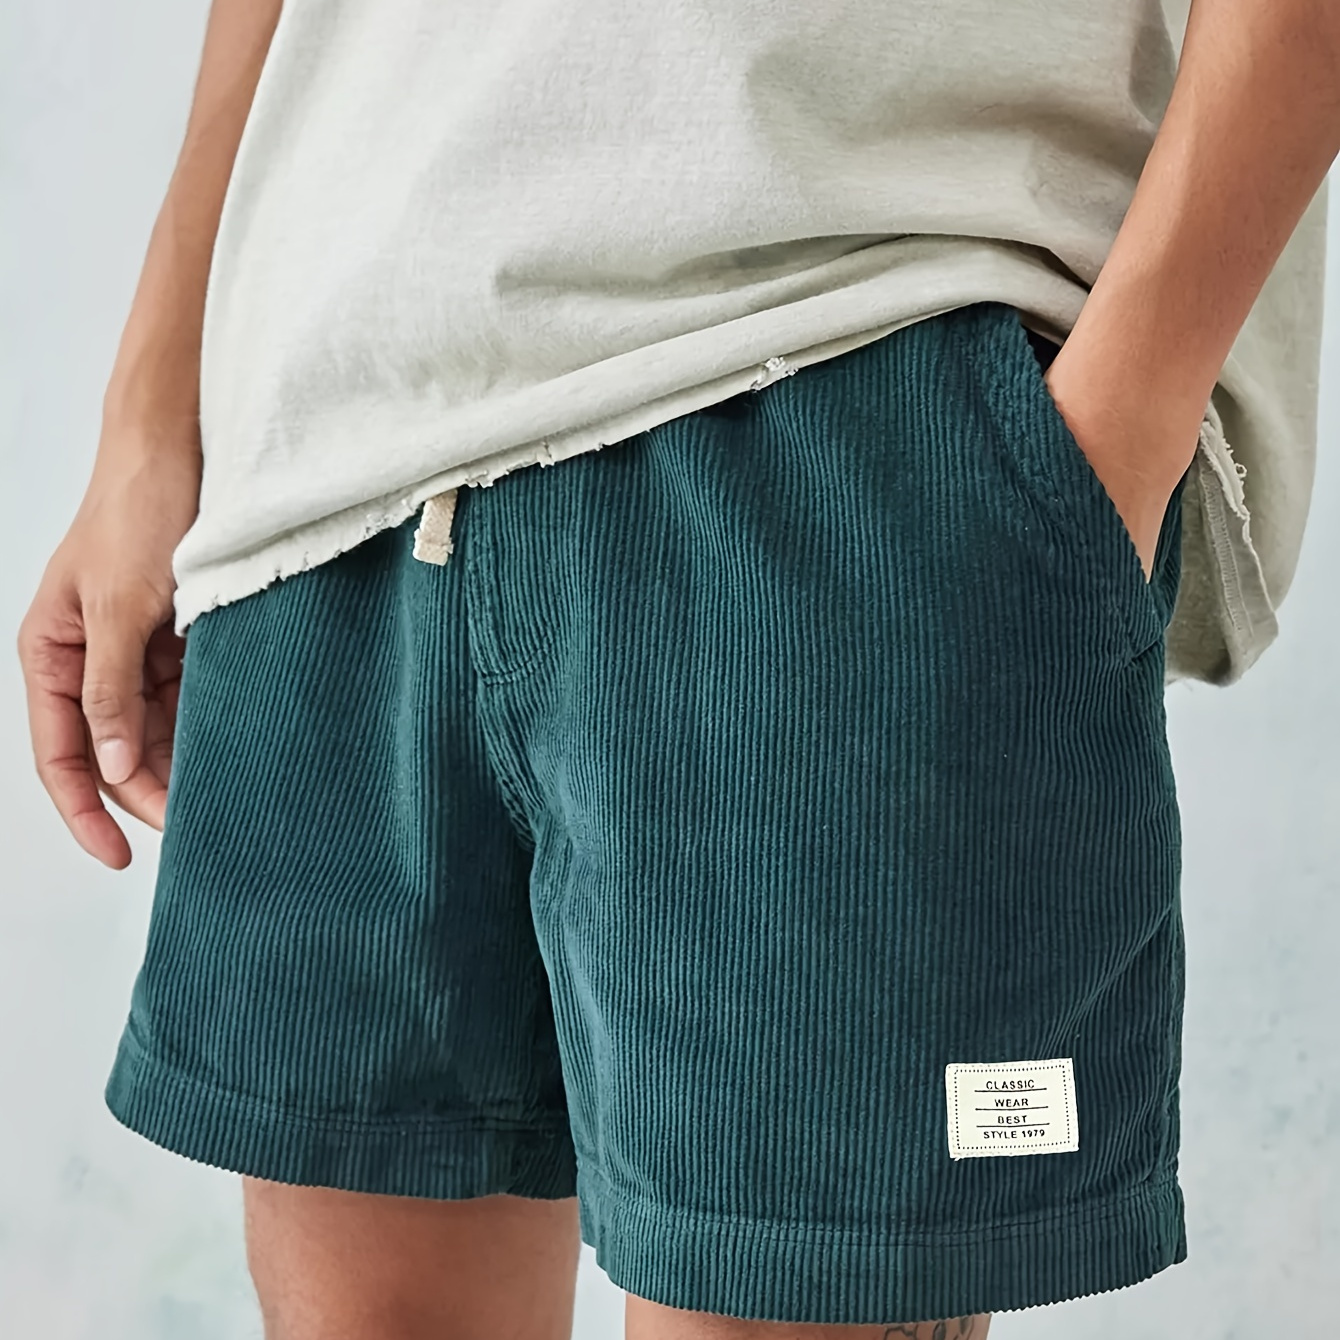 

Men's Solid Color Stripe Pattern Casual Shorts With Drawstring, Pockets And Label Piece, Trendy And Chic Shorts Suitable For Summer Daily Wear